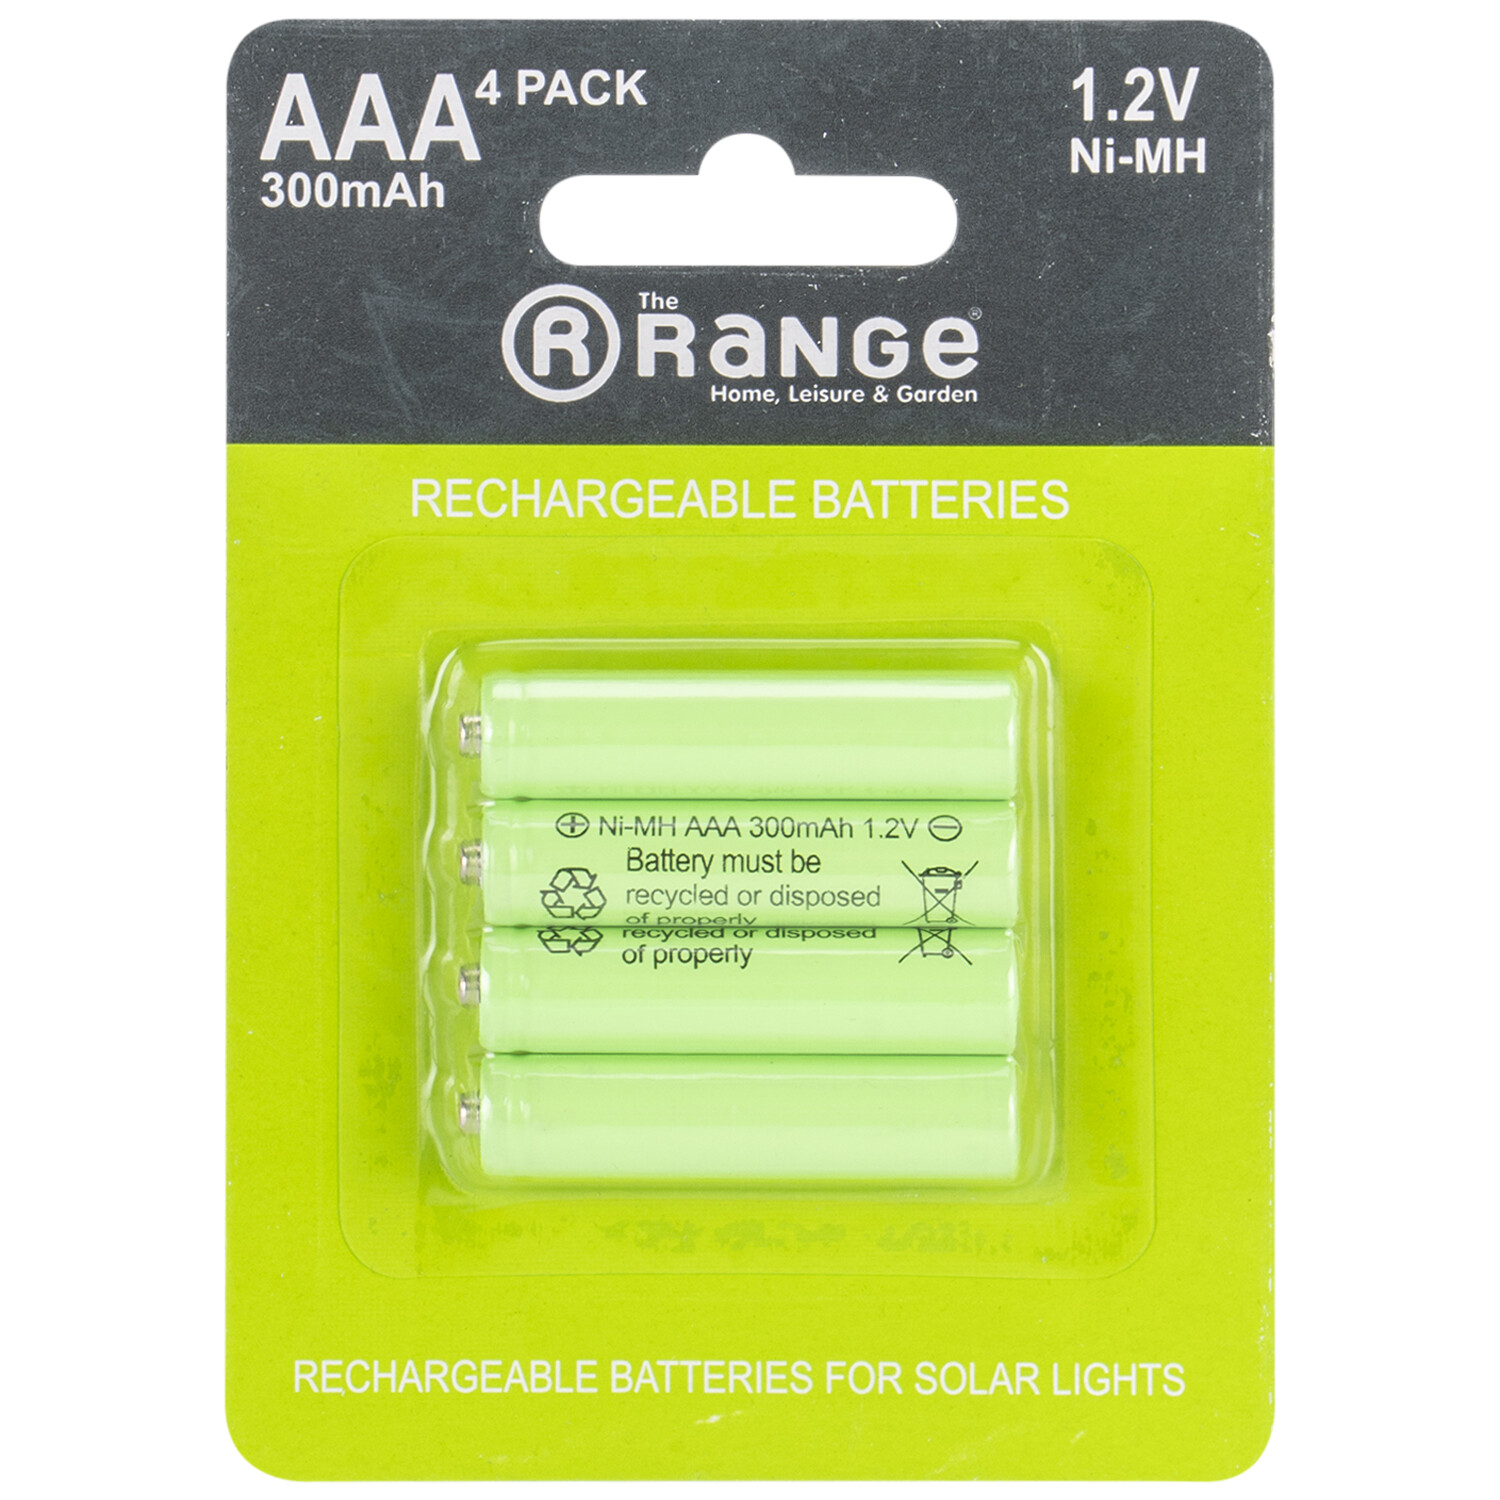 The Range AAA 4 Pack 1.2V Ni-MH Solar Light Rechargeable Batteries Image